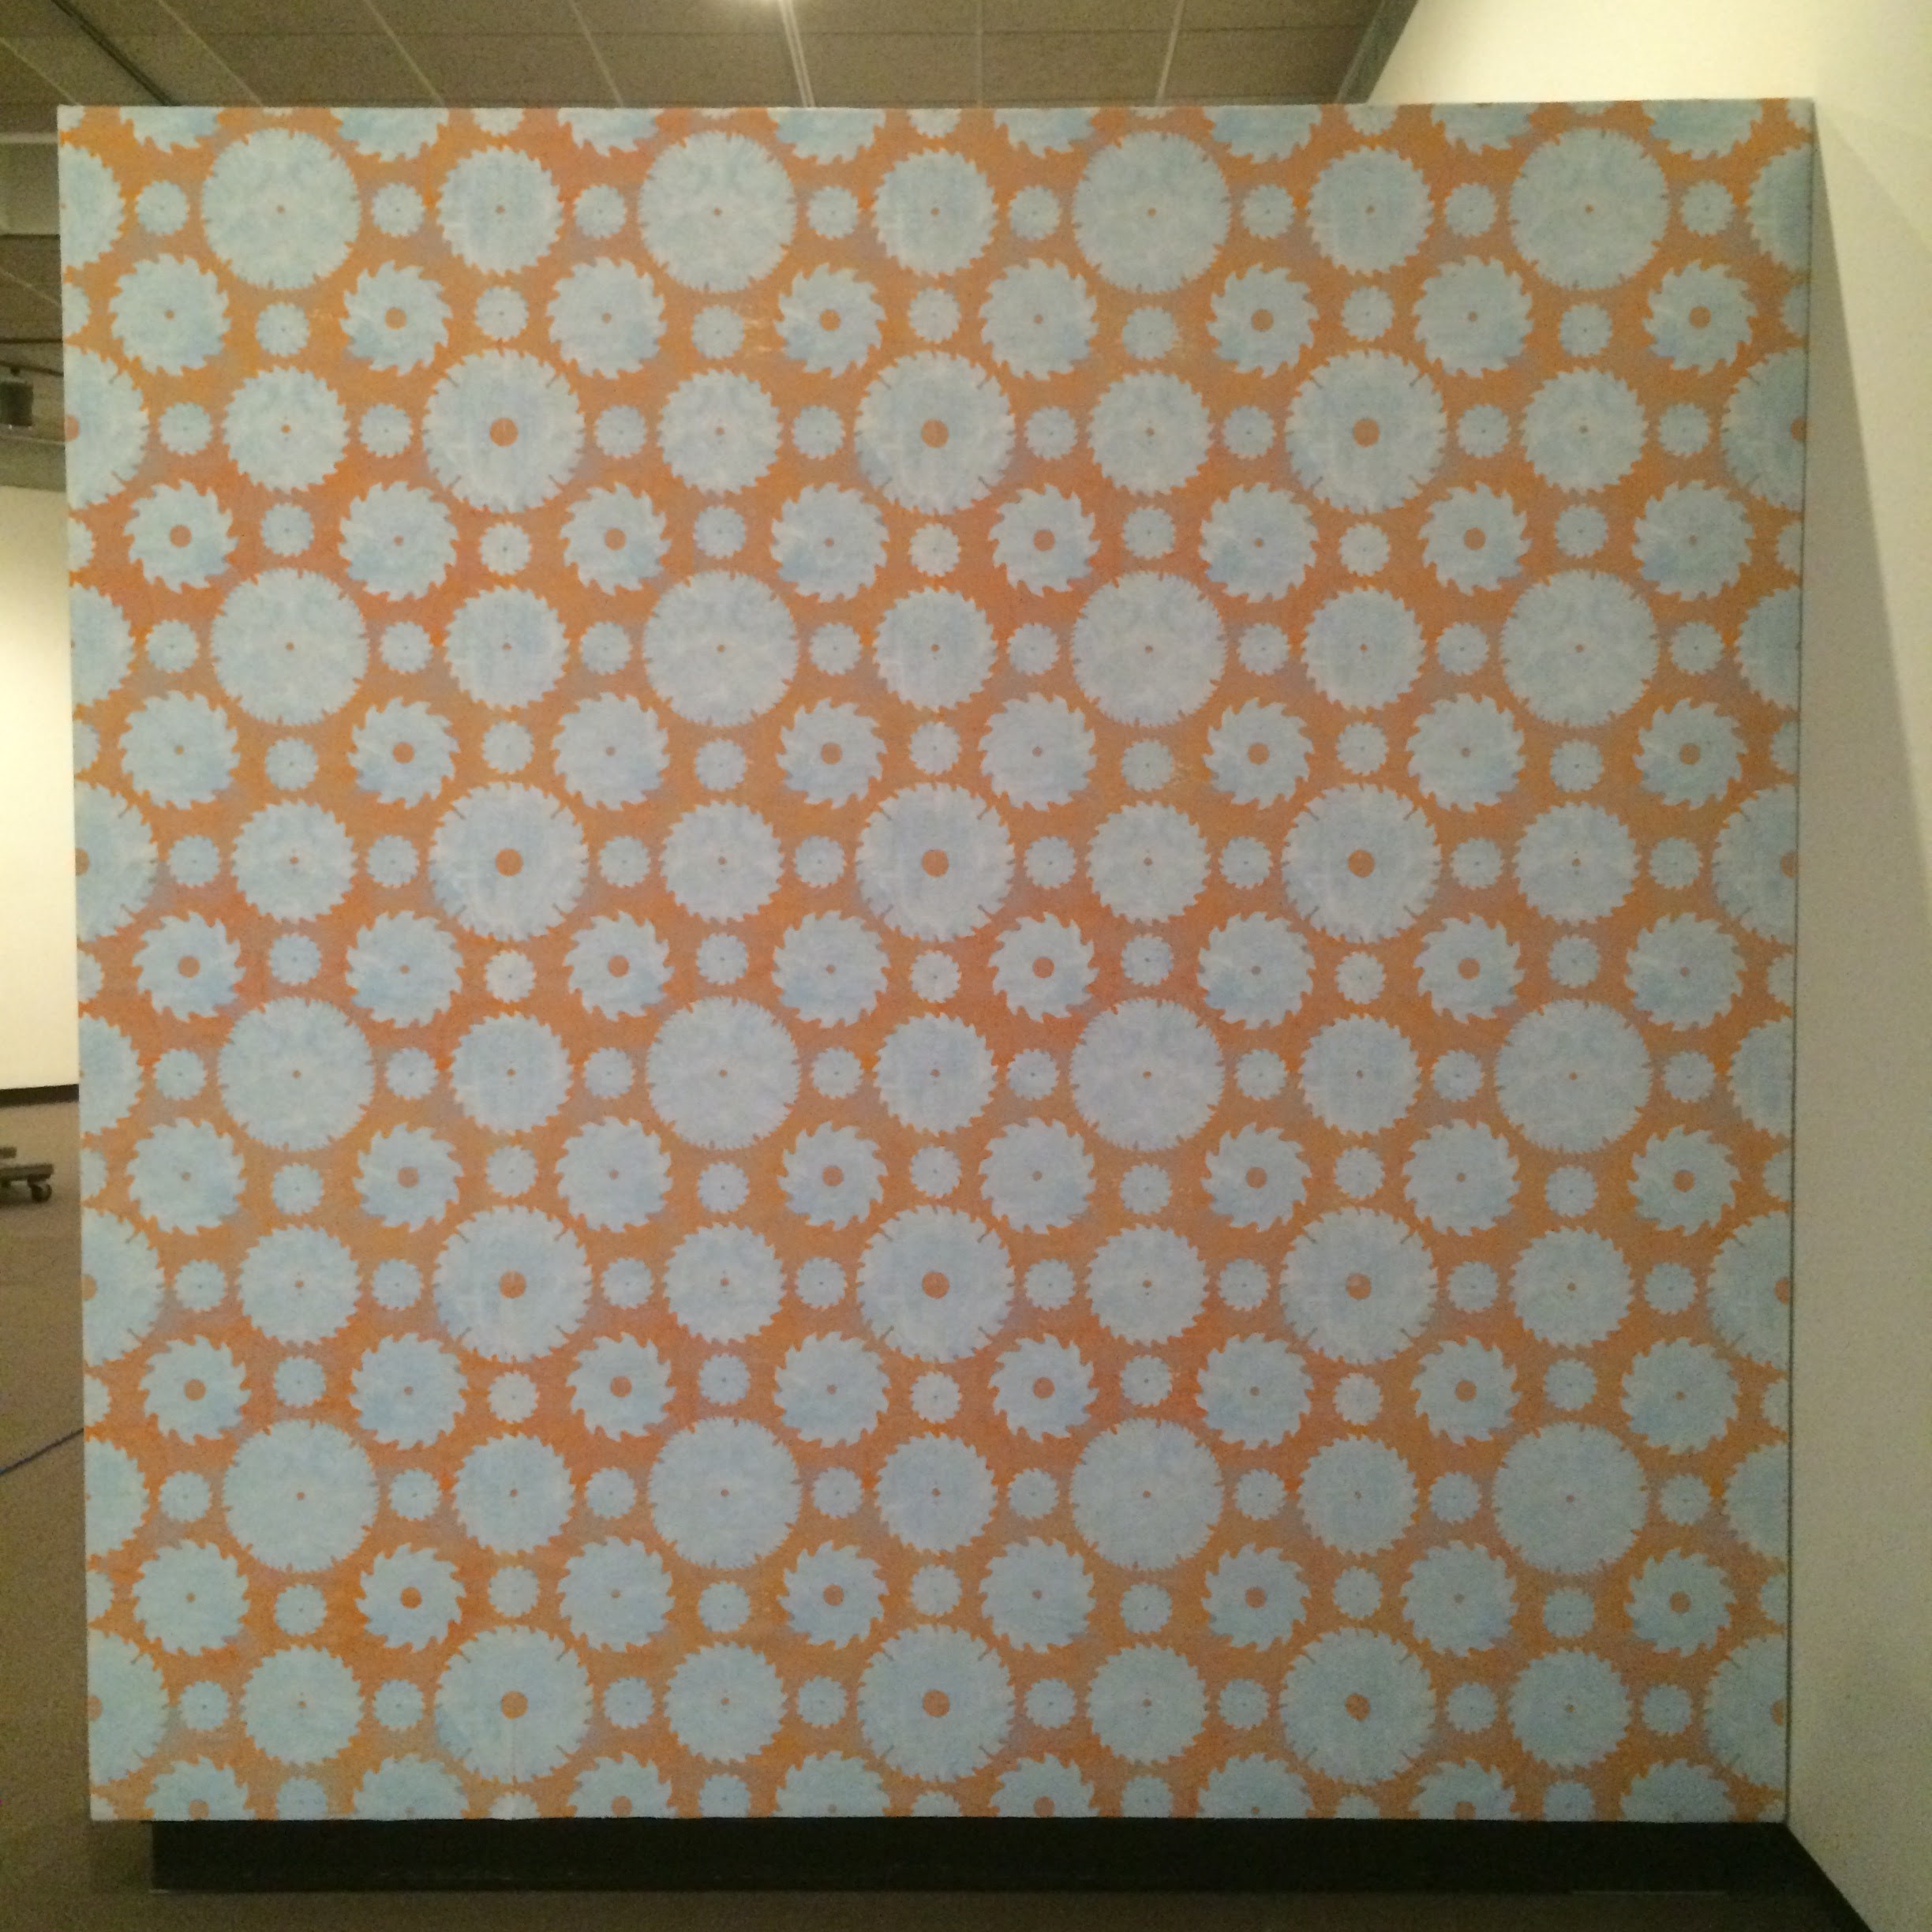 Sawblade Wallpaper It’s All Over • Part of the The biennial Four by Four 2014: Midwest Invitational Exhibition Acrylic on Tyvek